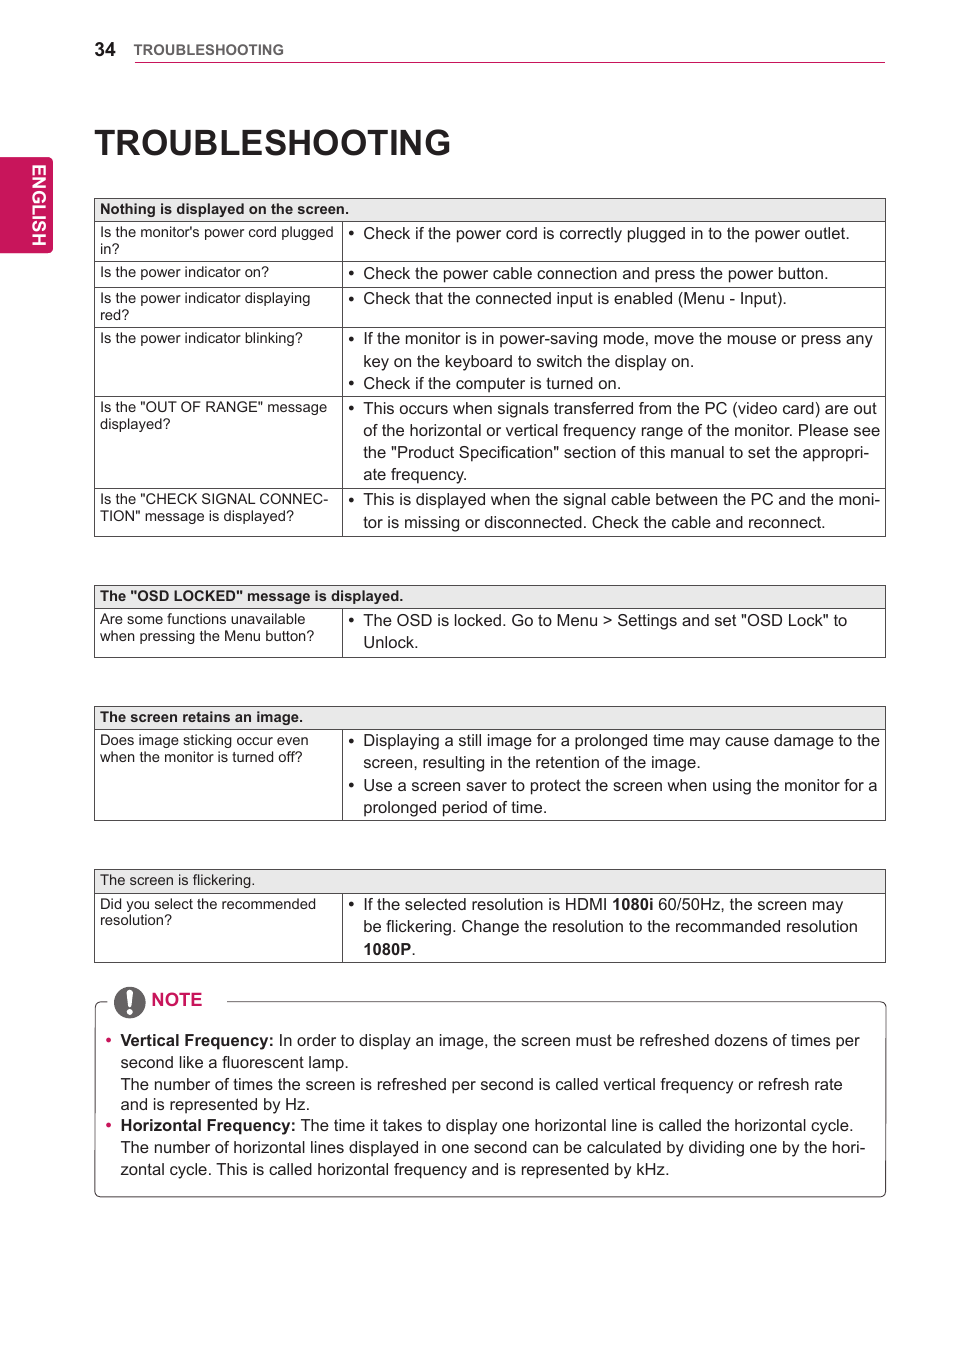 Troubleshooting | LG 29EA73-P User Manual | Page 34 / 39